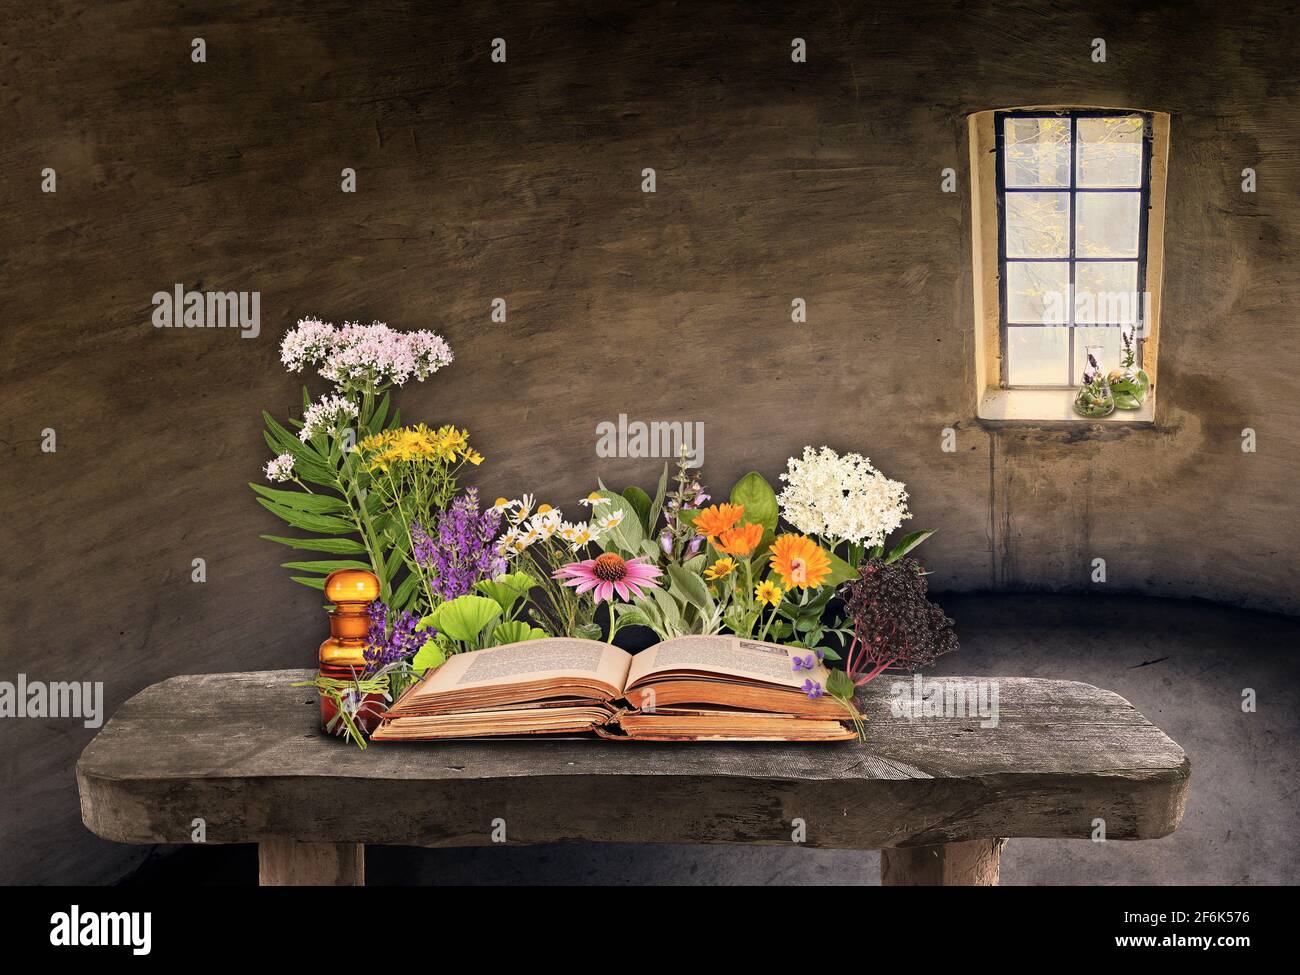 Medicinal plants of nature with old books and medicine bottles Stock Photo